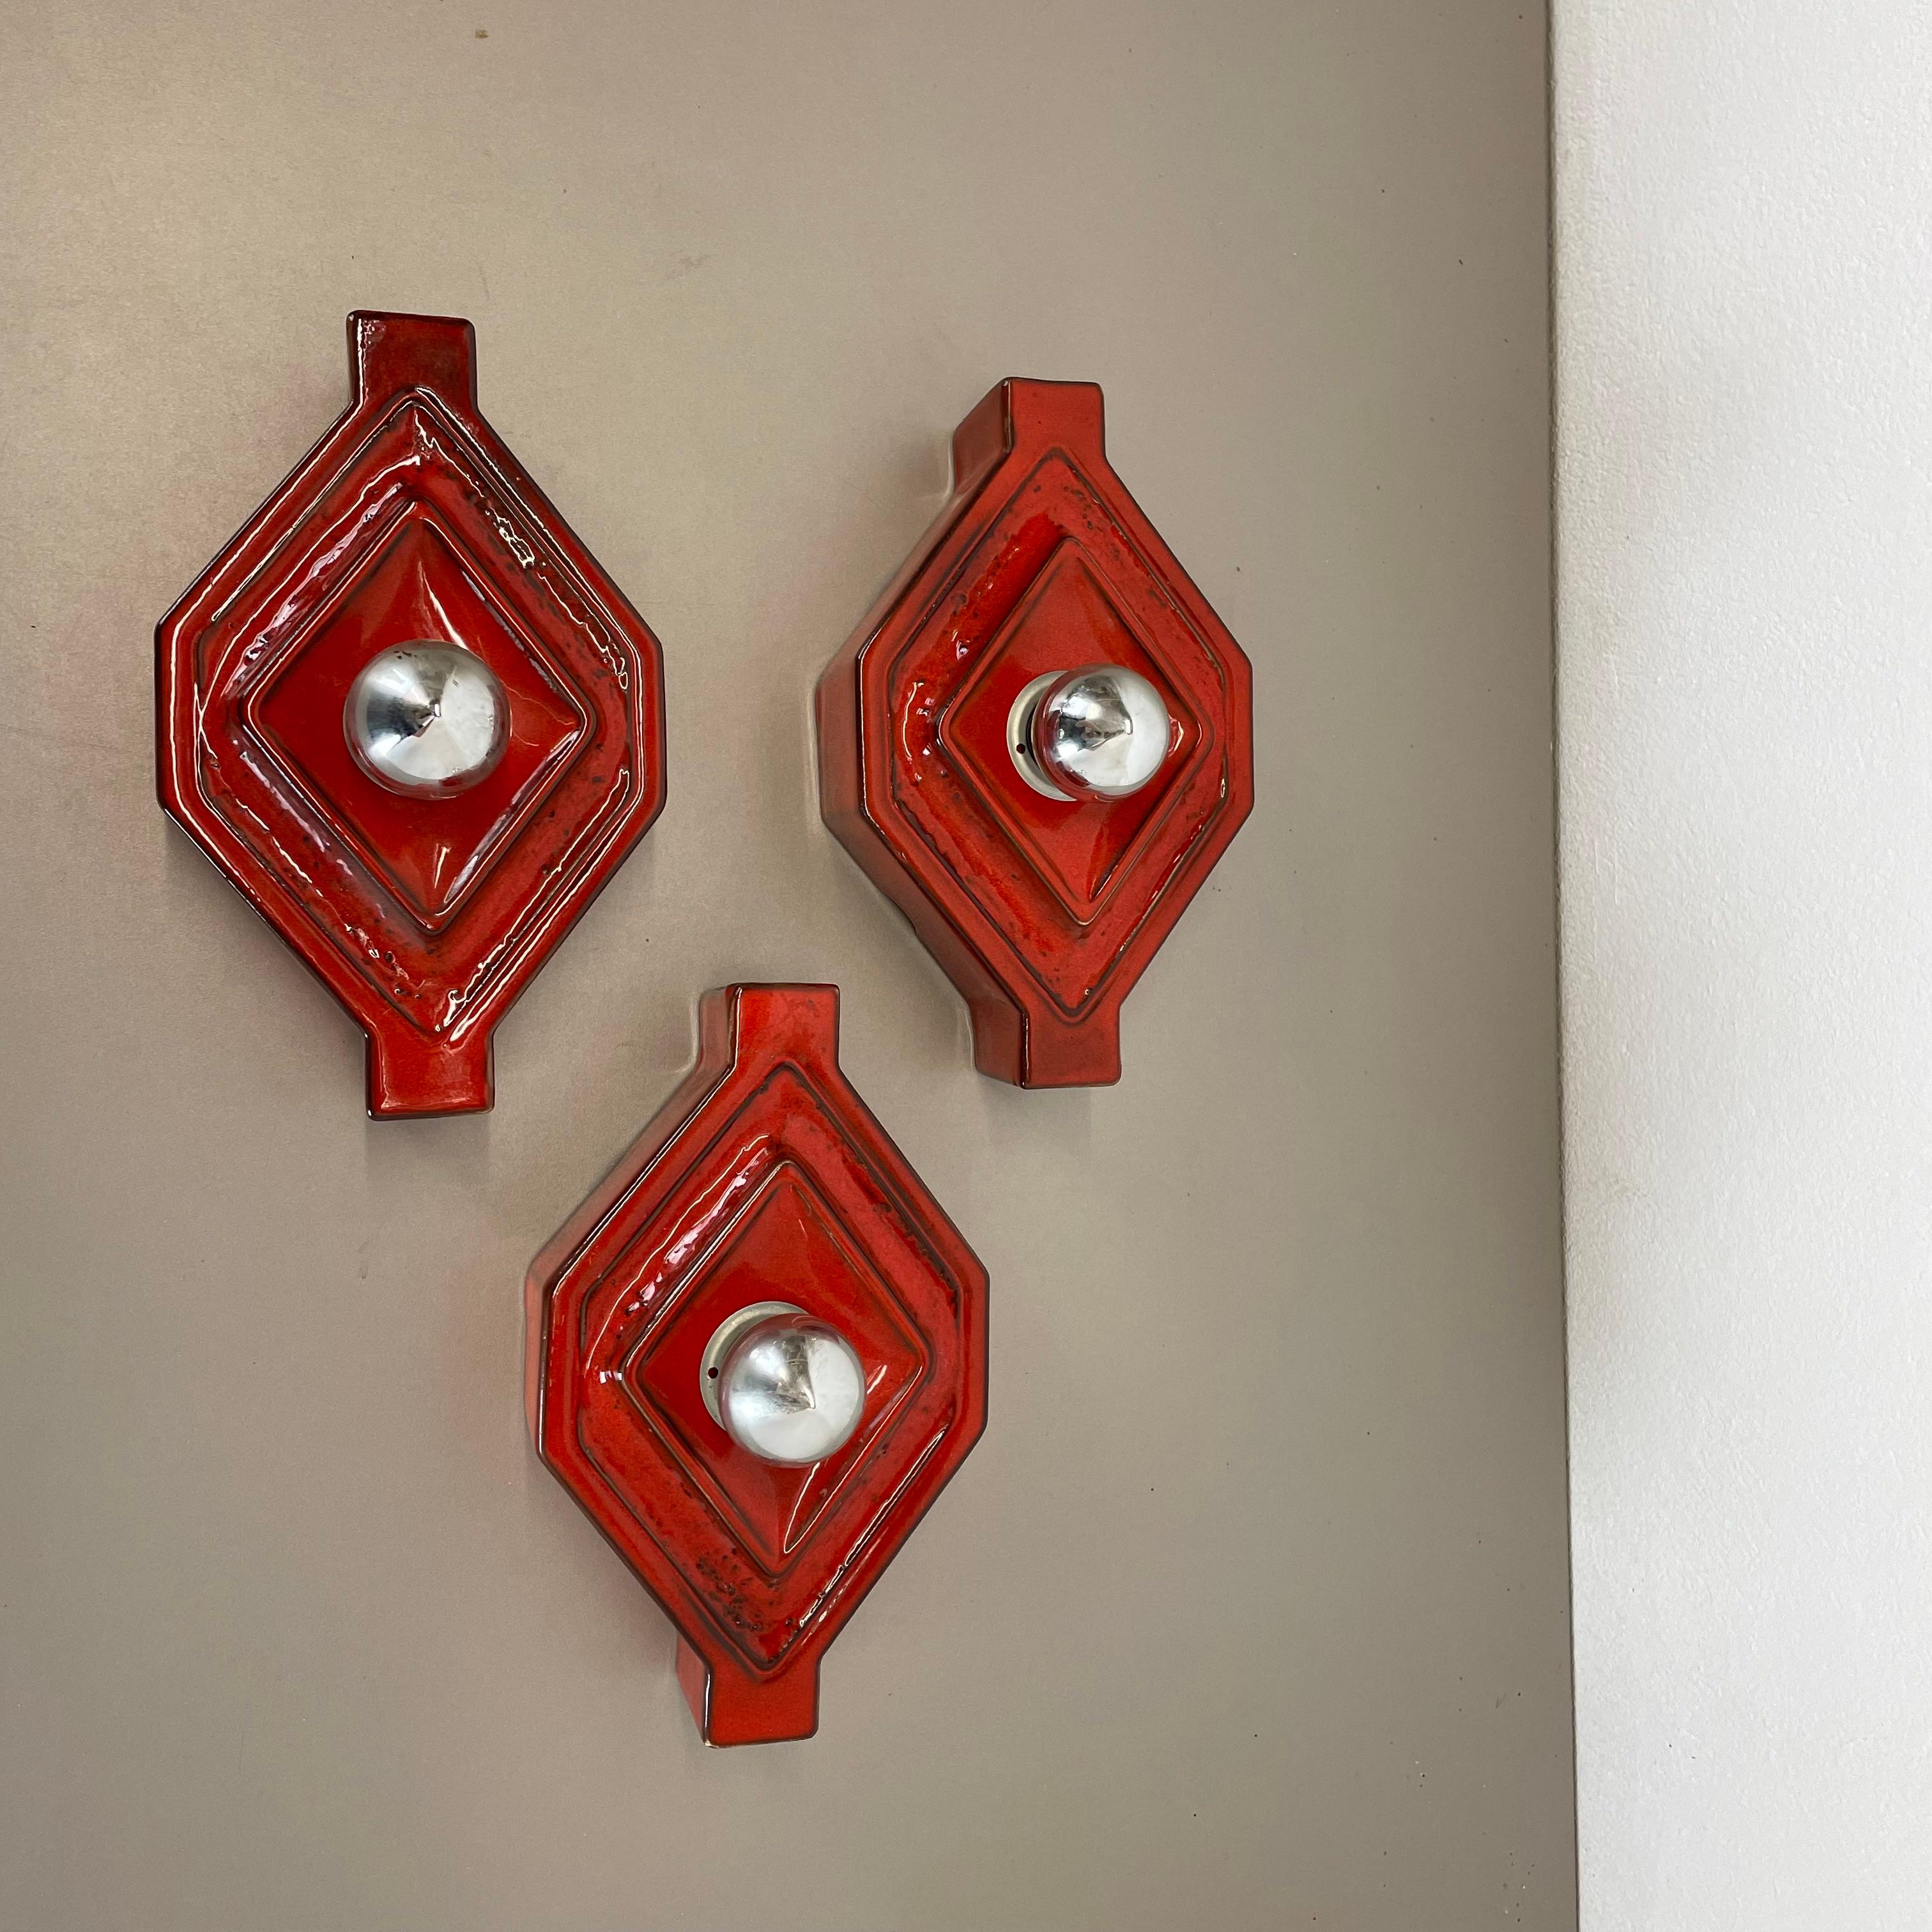 Article:

Wall light sconce set of three


Producer:

Pan Ceramic, Germany.



Origin:

Germany.



Age:

1970s.



Description:

Original 1970s modernist German wall lights made of ceramic in fat lava optic. This super rare set of three walls light